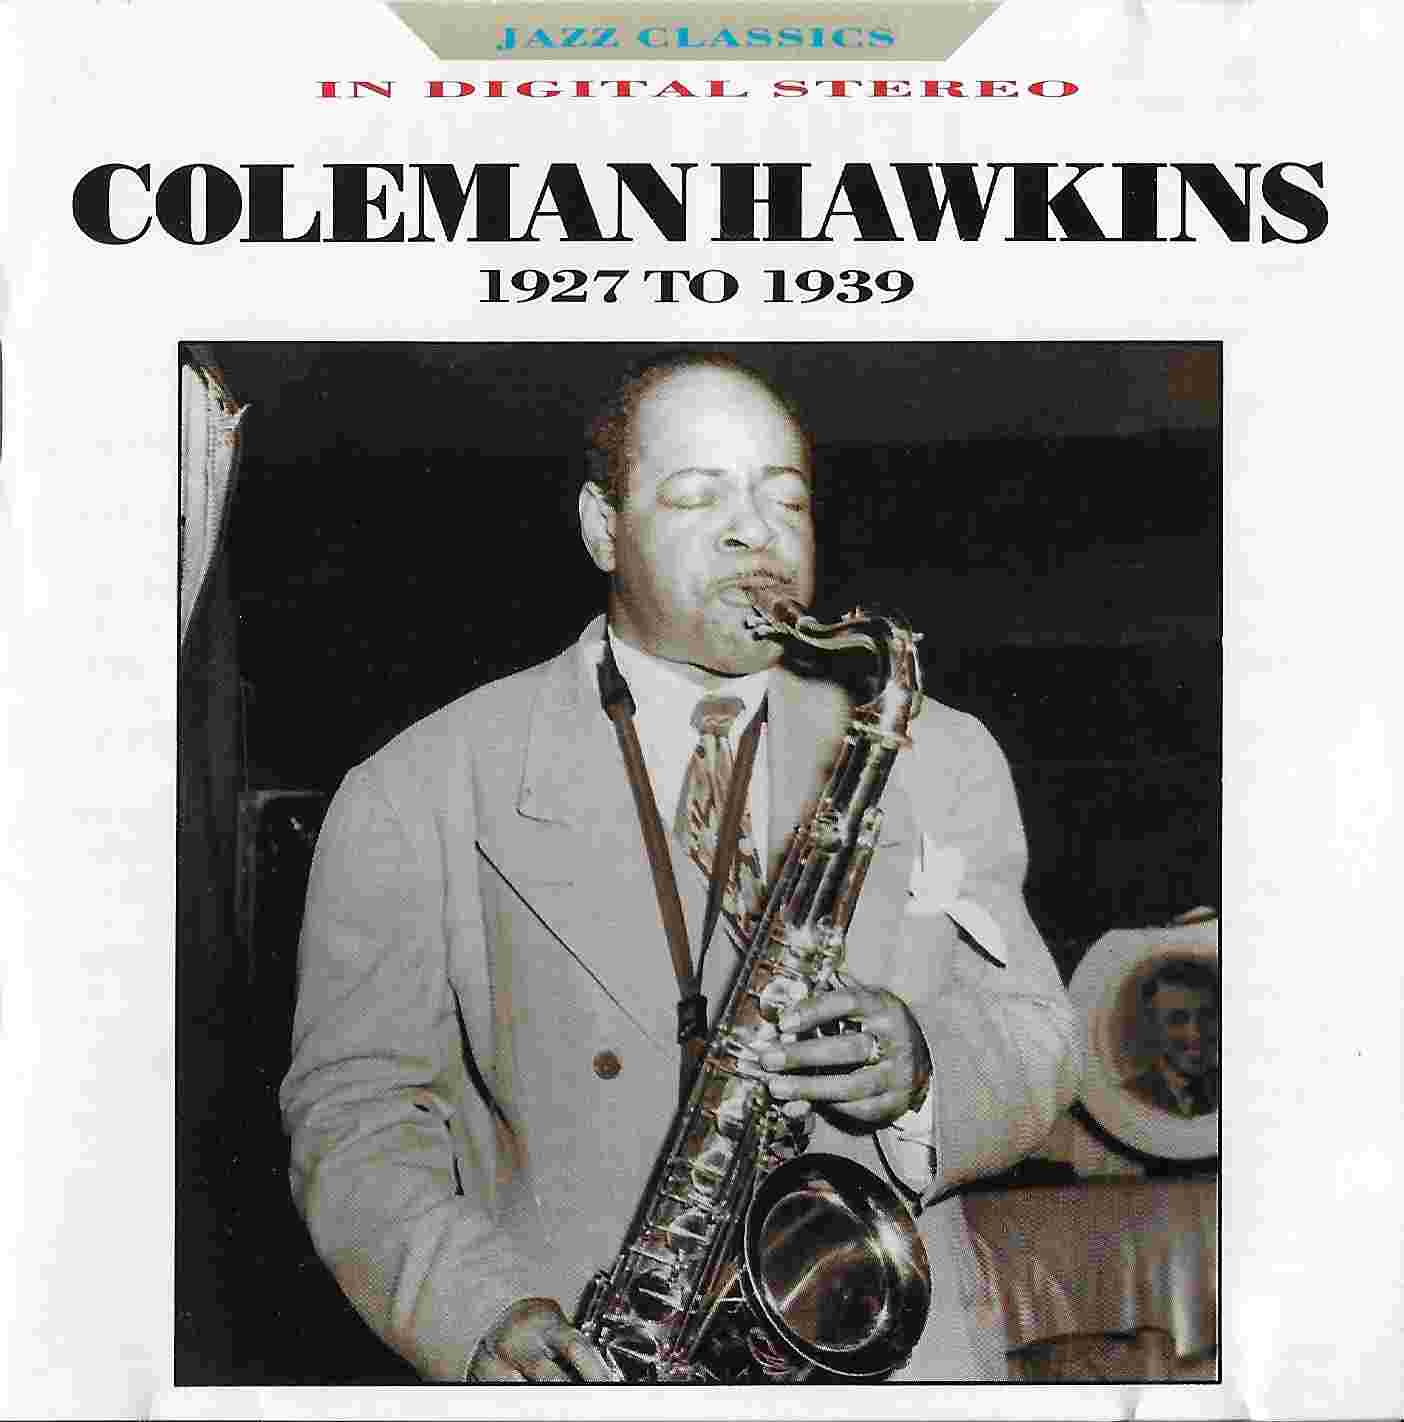 Picture of BBCCD698 Jazz classics - Coleman Hawkins by artist Coleman Hawkins from the BBC records and Tapes library